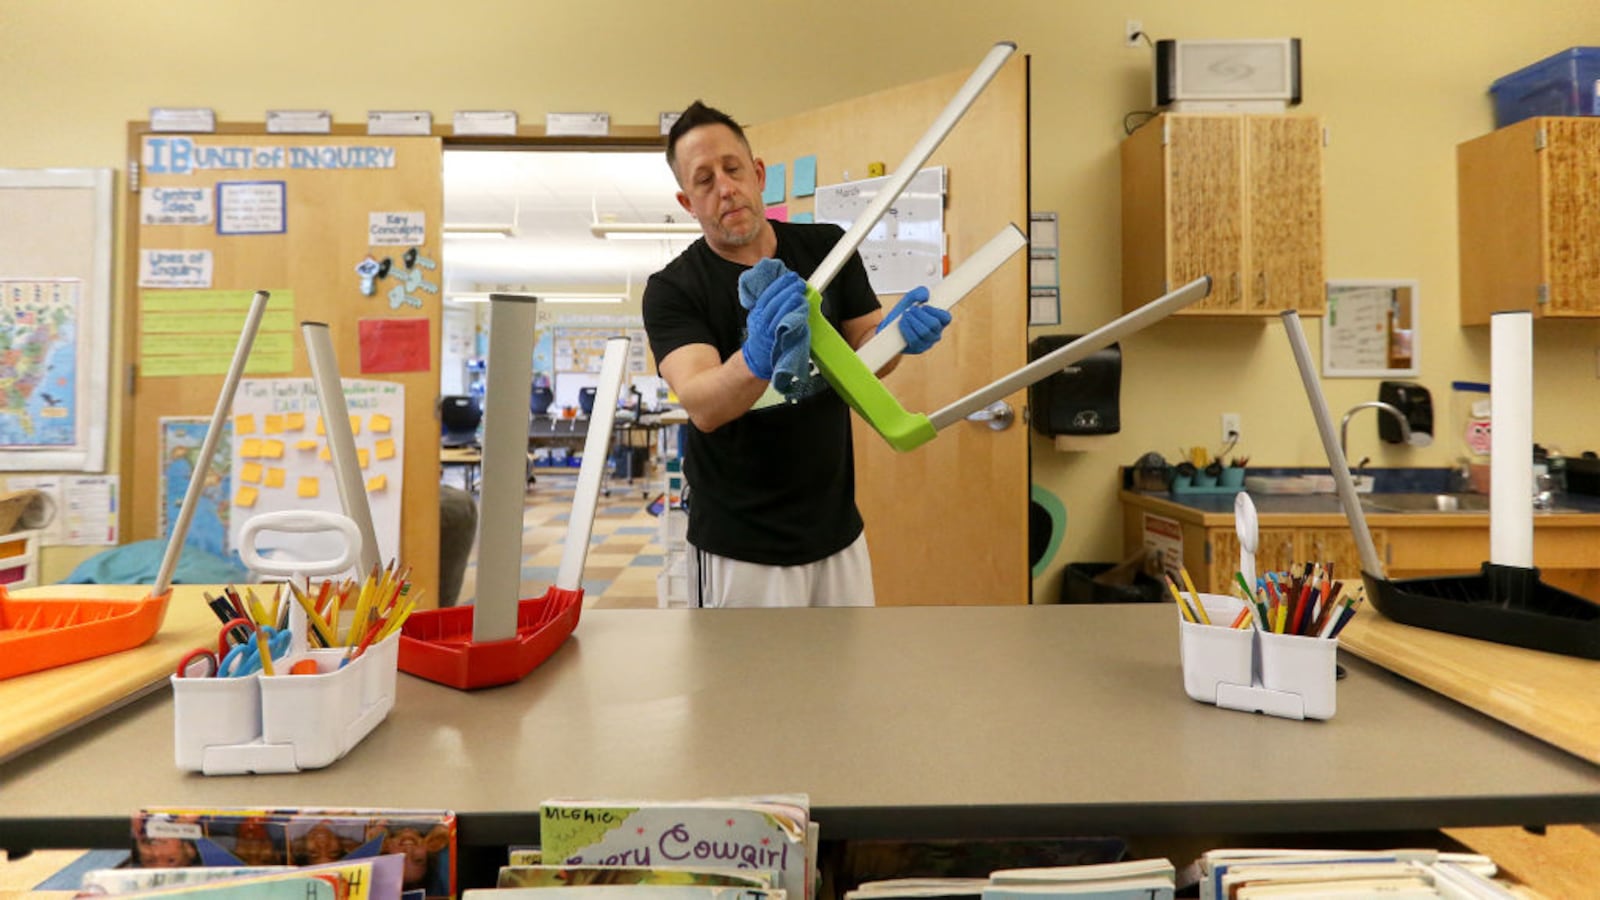 PORTLAND, ME - MARCH 6: Joseph Miller, a custodian at Ocean Avenue Elementary School, uses a disinfectant-soaked towel to clean a chair and other "touch areas" throughout a classroom. (Staff photo by Ben McCanna/Portland Press Herald via Getty Images)